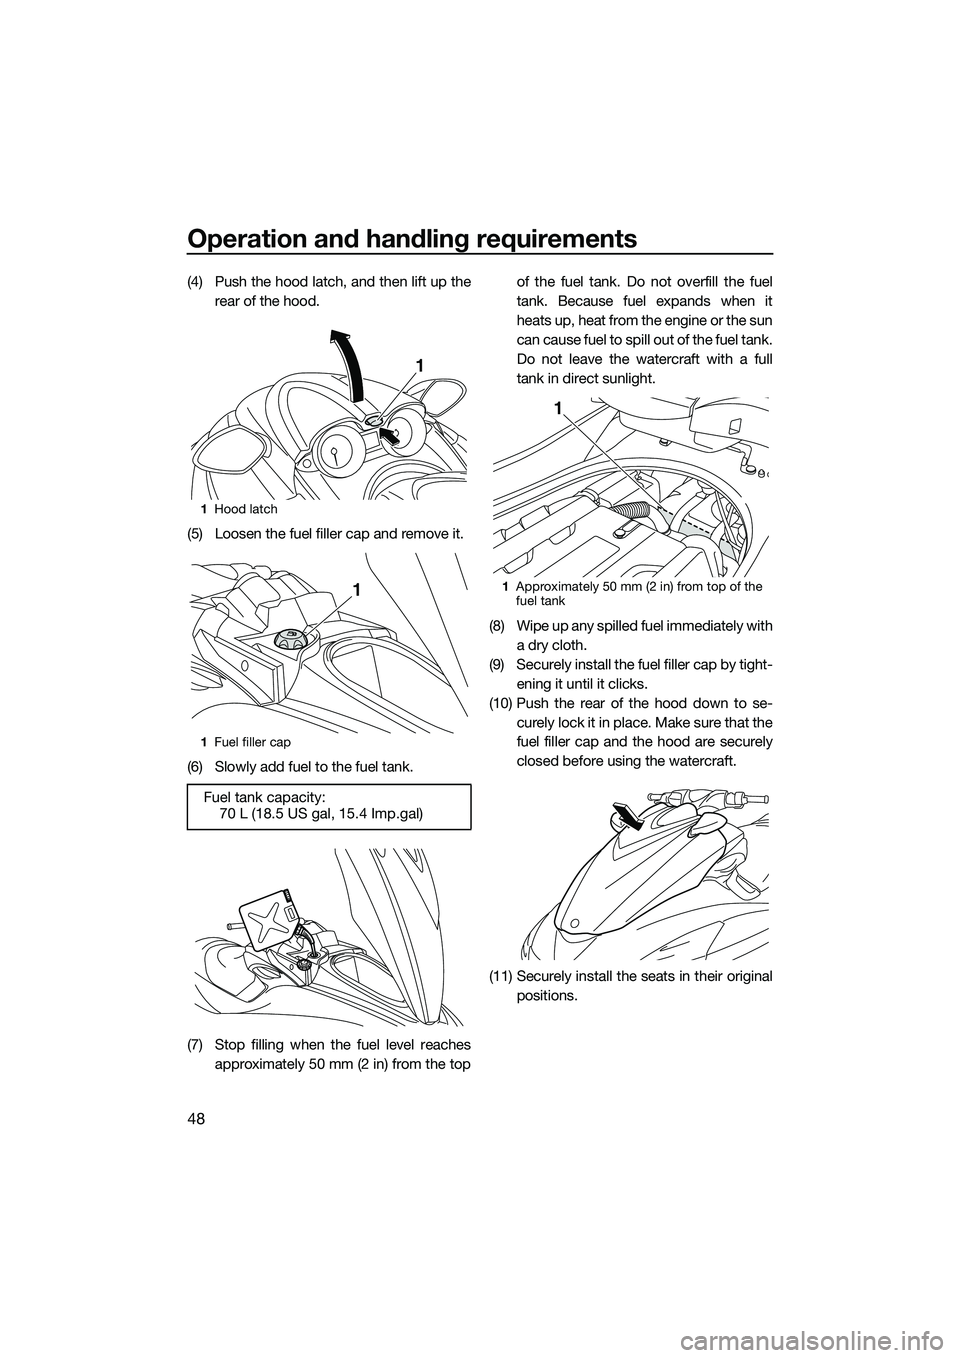 YAMAHA FZR SVHO 2015  Owners Manual Operation and handling requirements
48
(4) Push the hood latch, and then lift up therear of the hood.
(5) Loosen the fuel filler cap and remove it.
(6) Slowly add fuel to the fuel tank.
(7) Stop filli